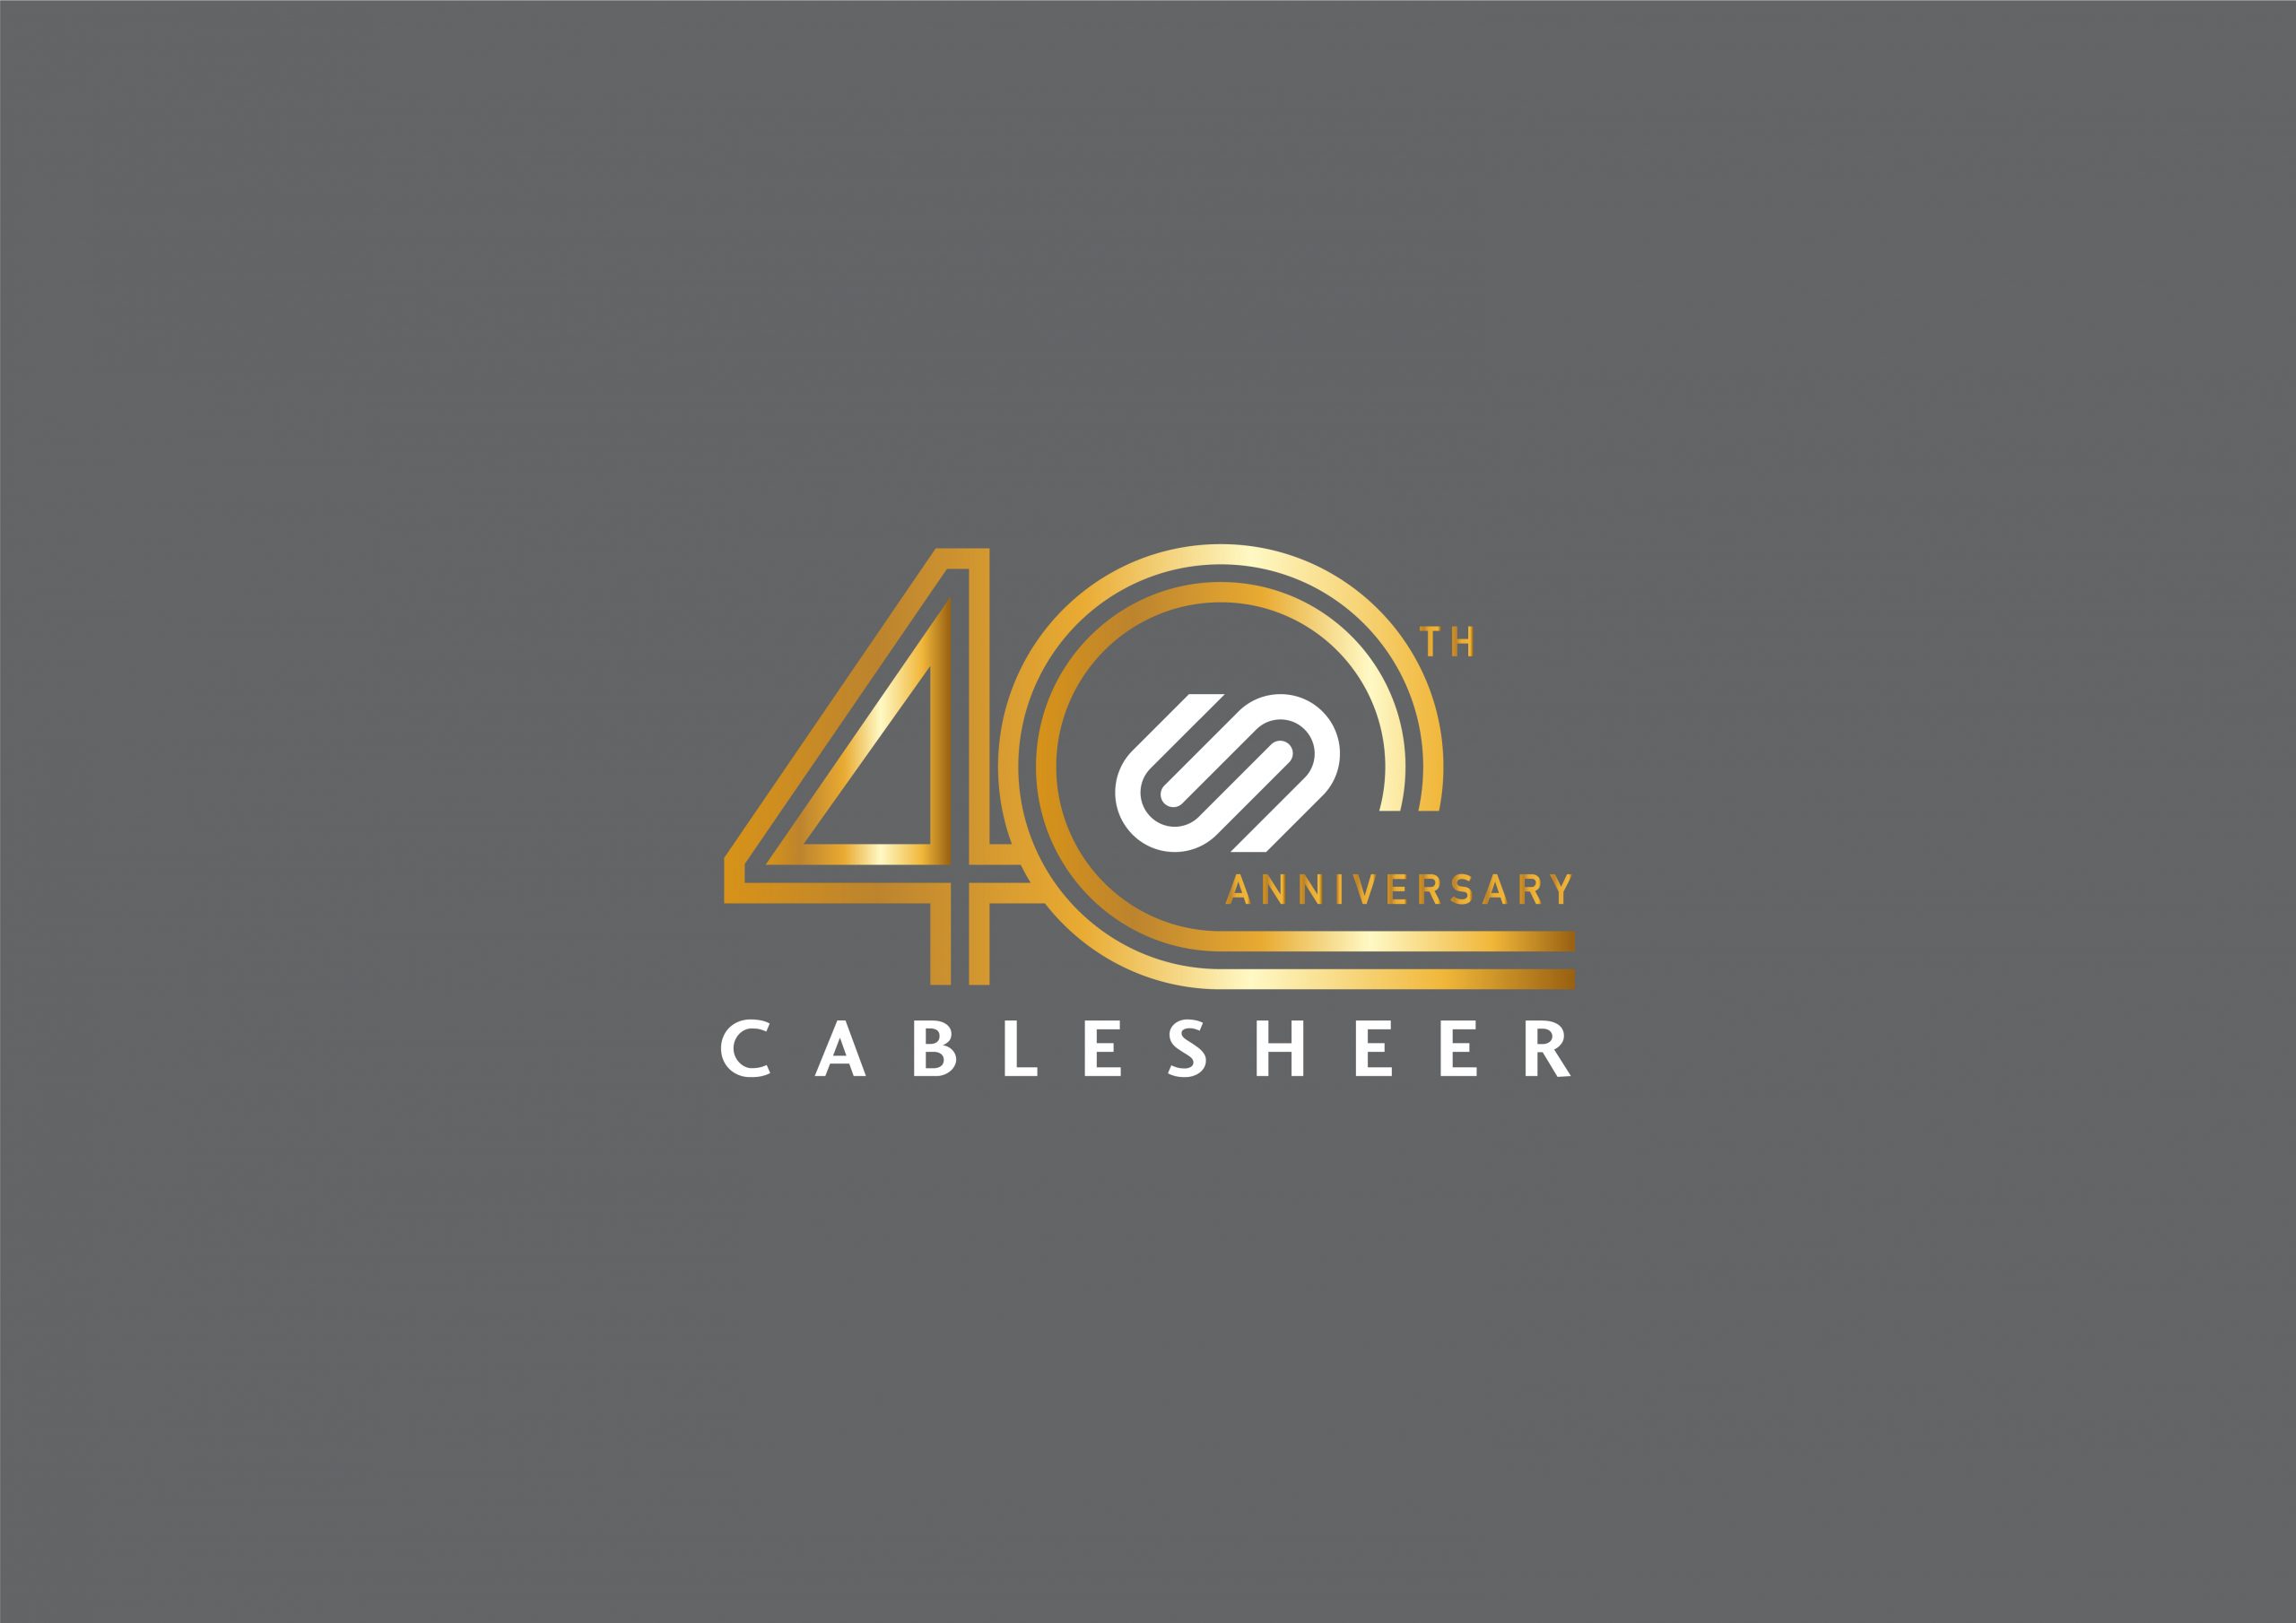 Celebrating 40 Years of Excellence: Cablesheer’s Remarkable Journey